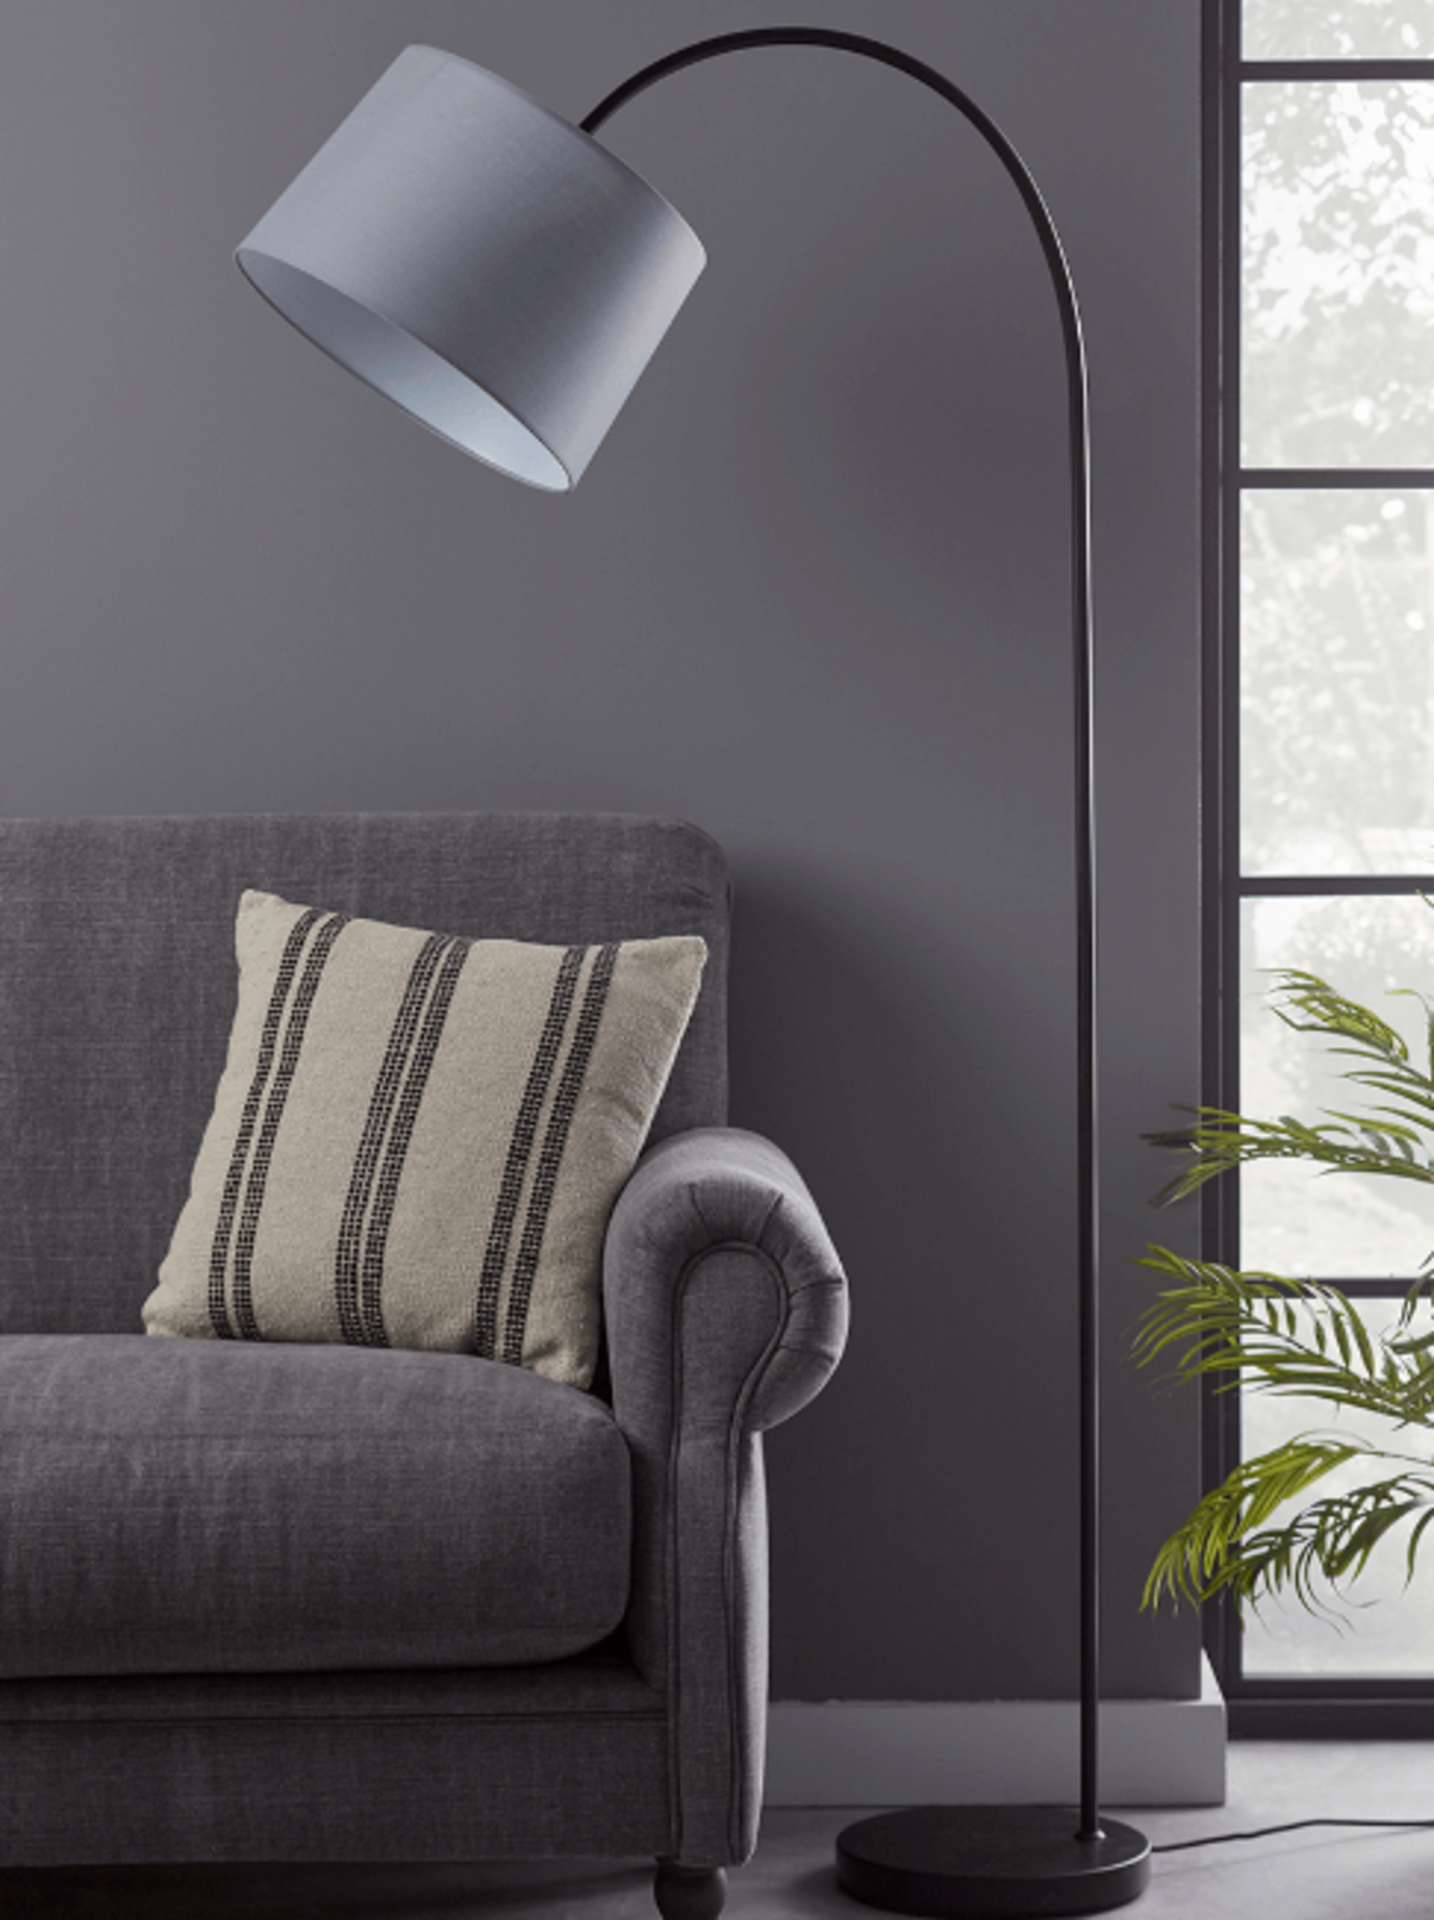 Cox & Cox Inwood Floor Lamp. RRP £185.00. Set the mood for modern living with a feature floor lamp